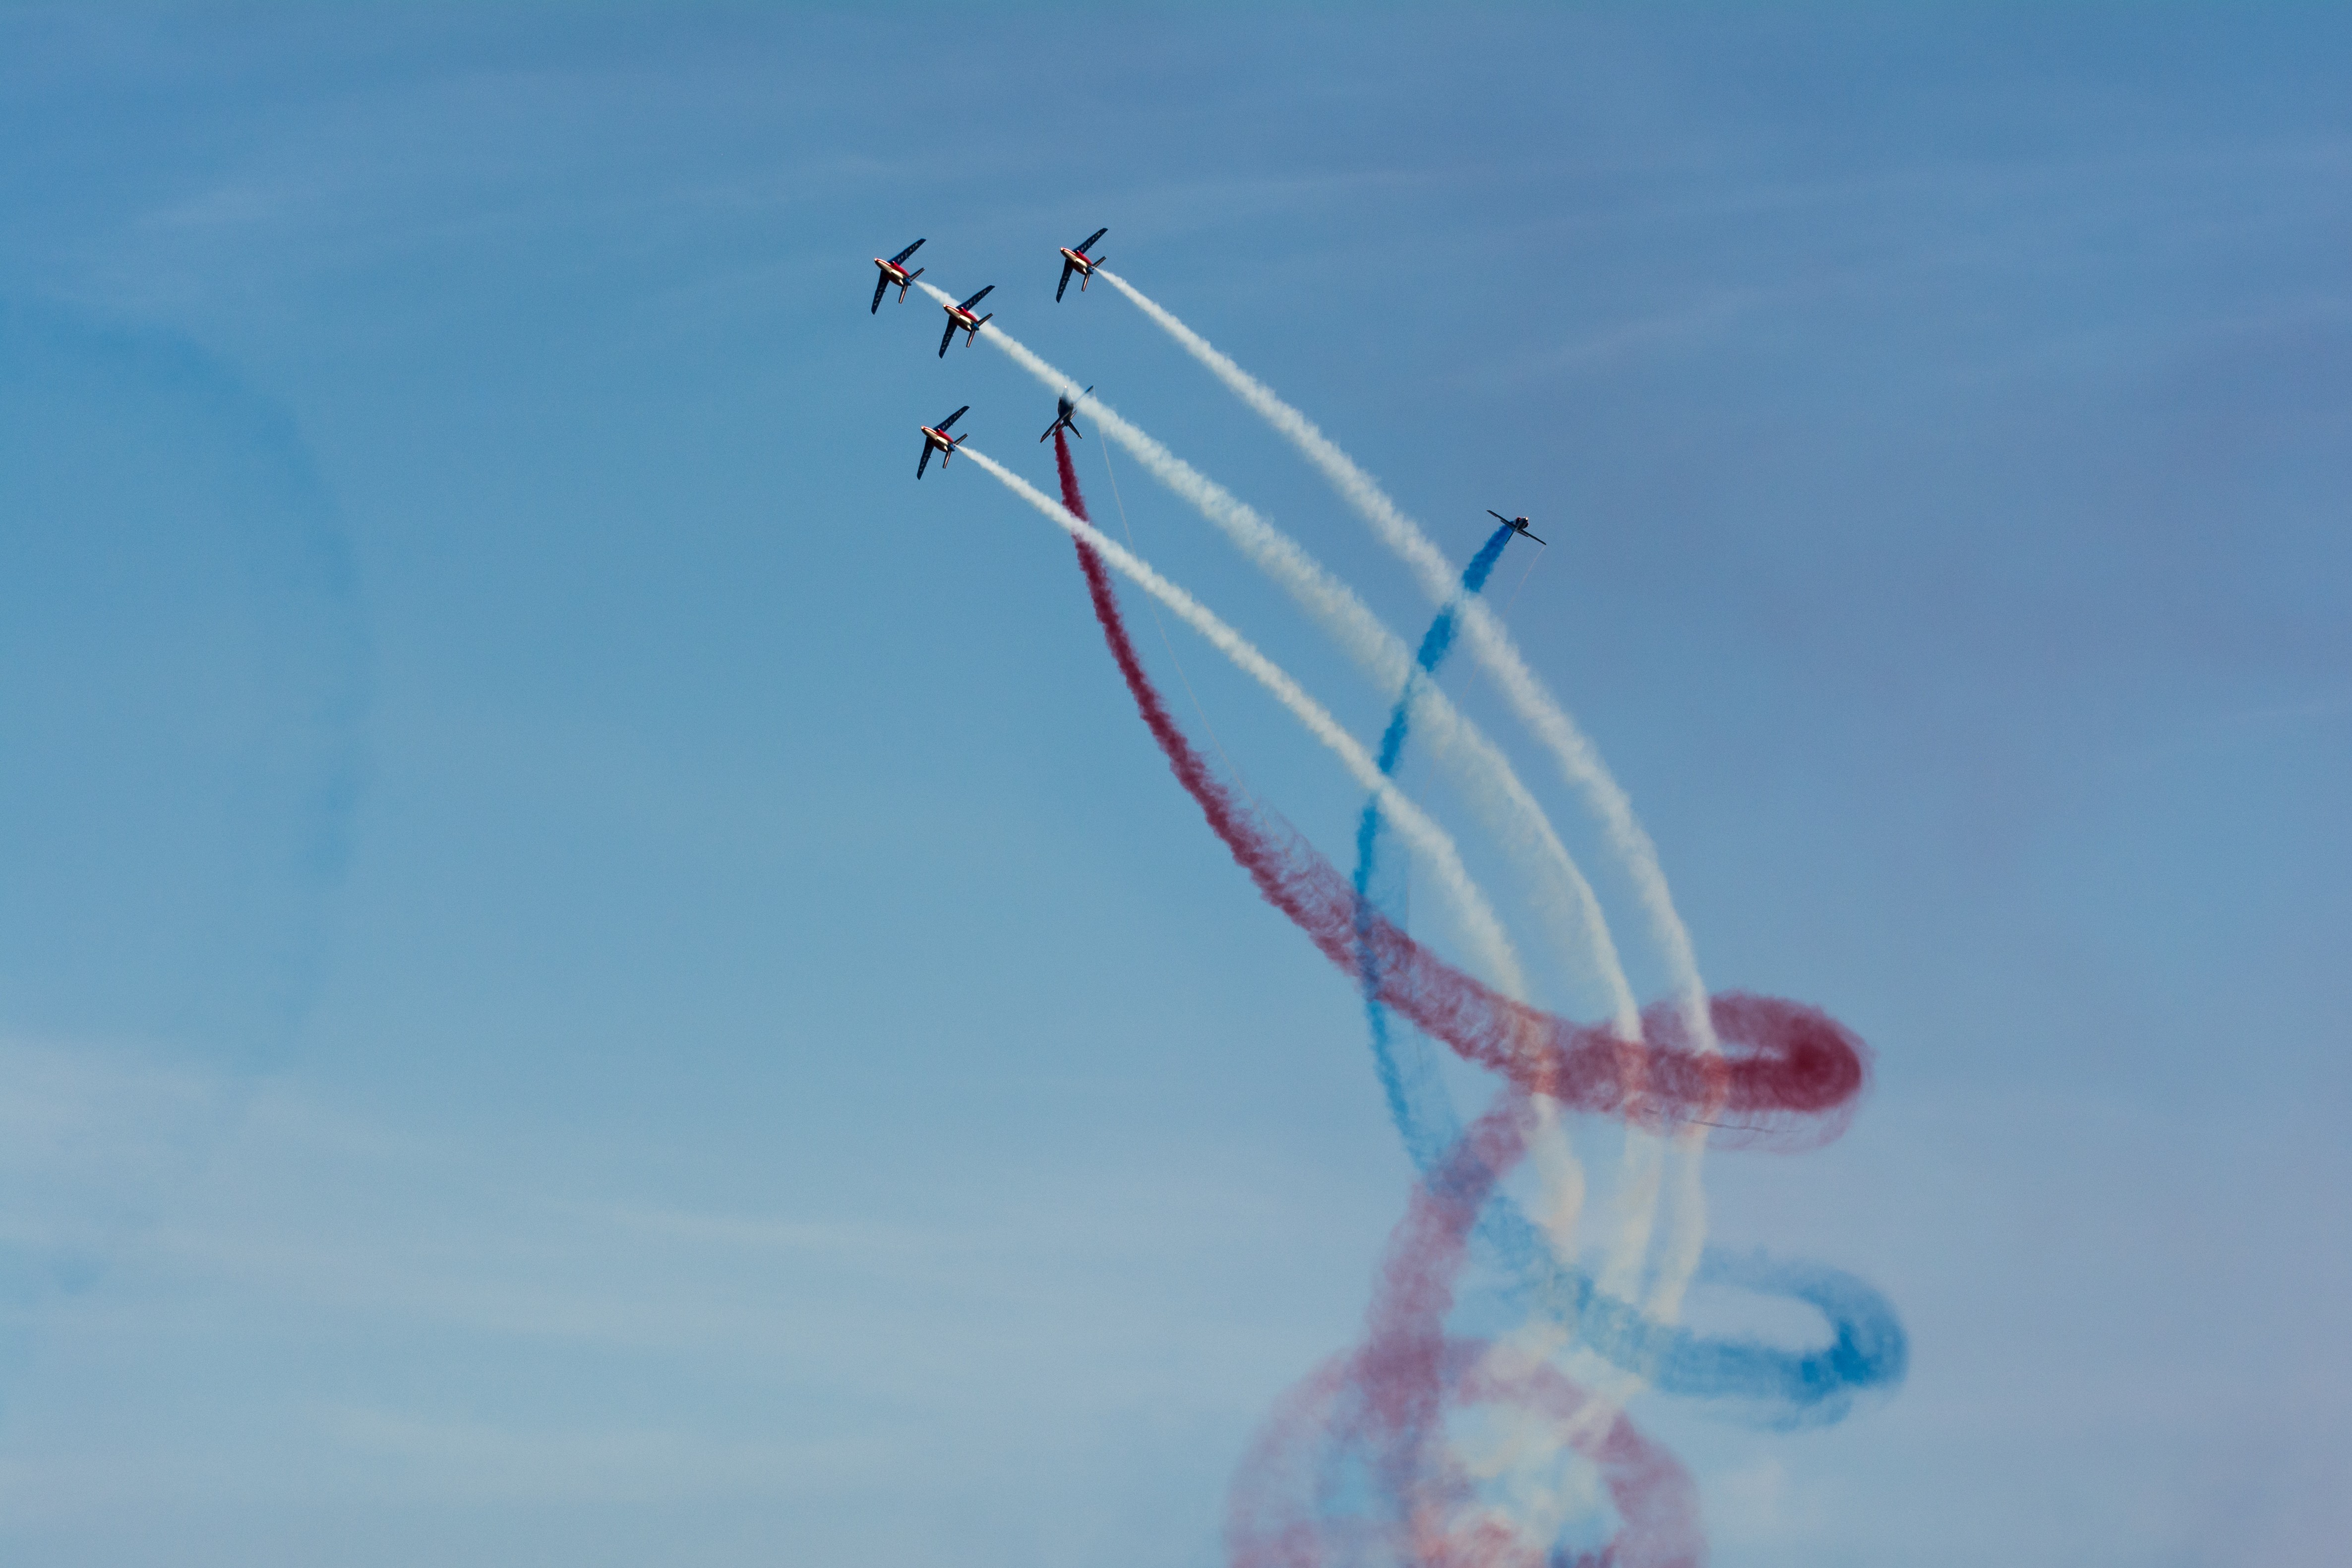 General 4743x3162 airshows airplane Patrouille de France contrails aircraft vehicle military aircraft aerobatic team